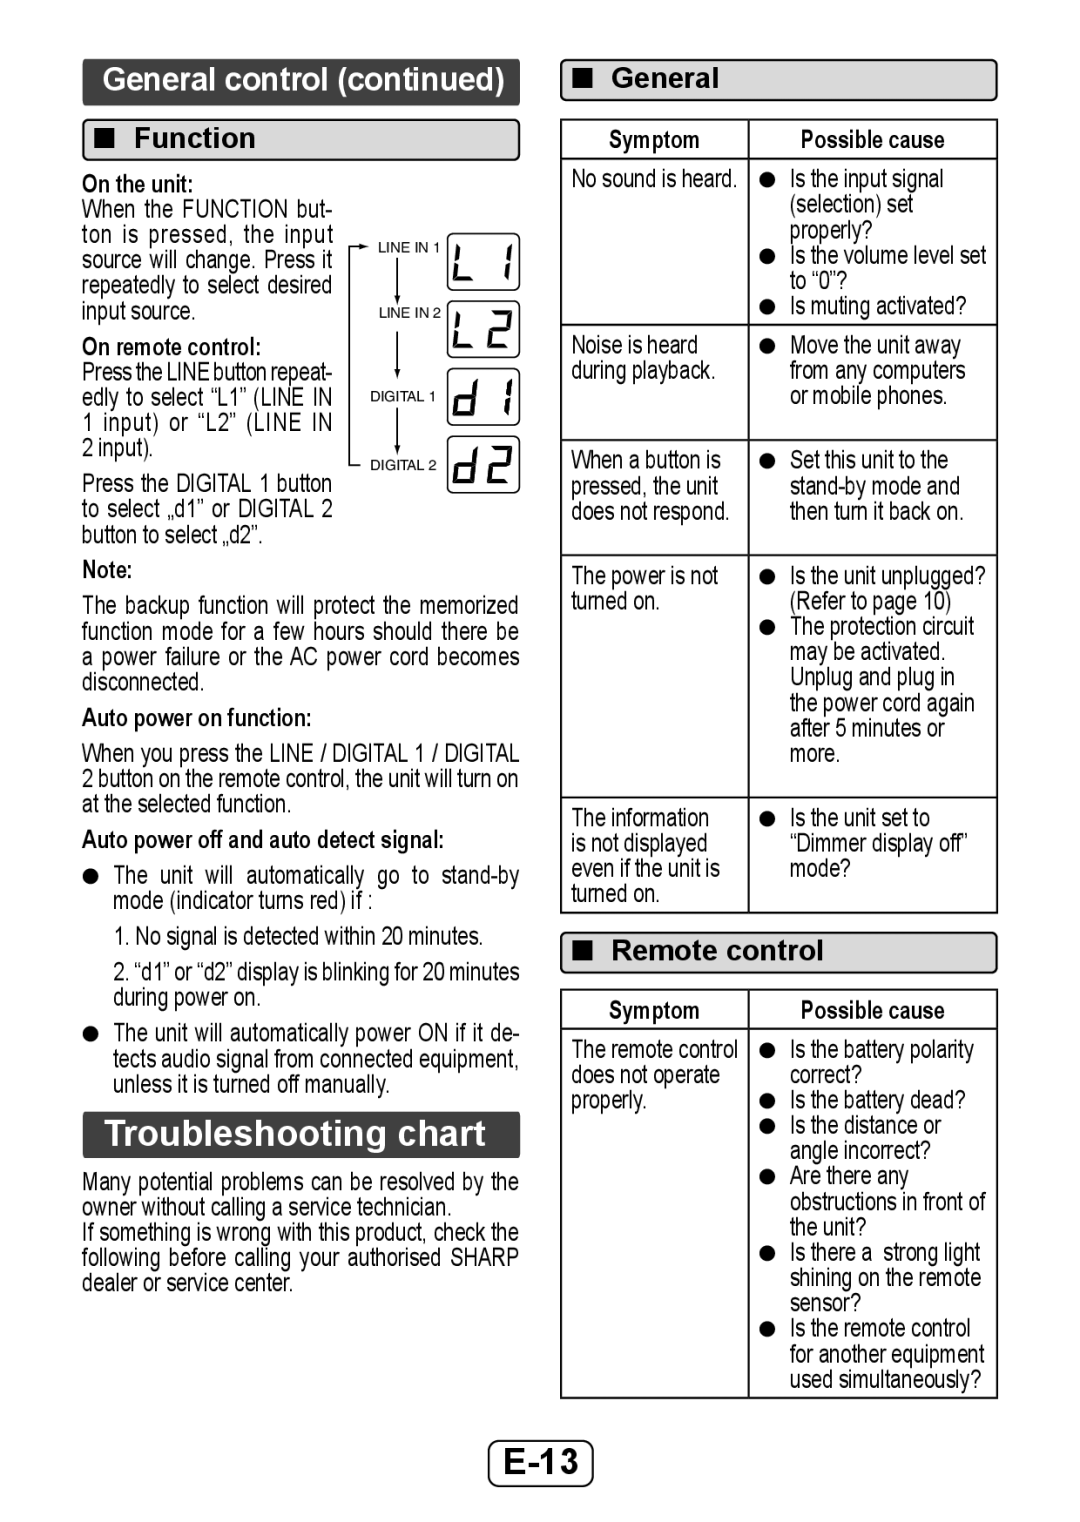 Sharp HTSB350 Troubleshooting chart, E-13, Function, Remote control, On the unit, On remote control, Symptom, General 